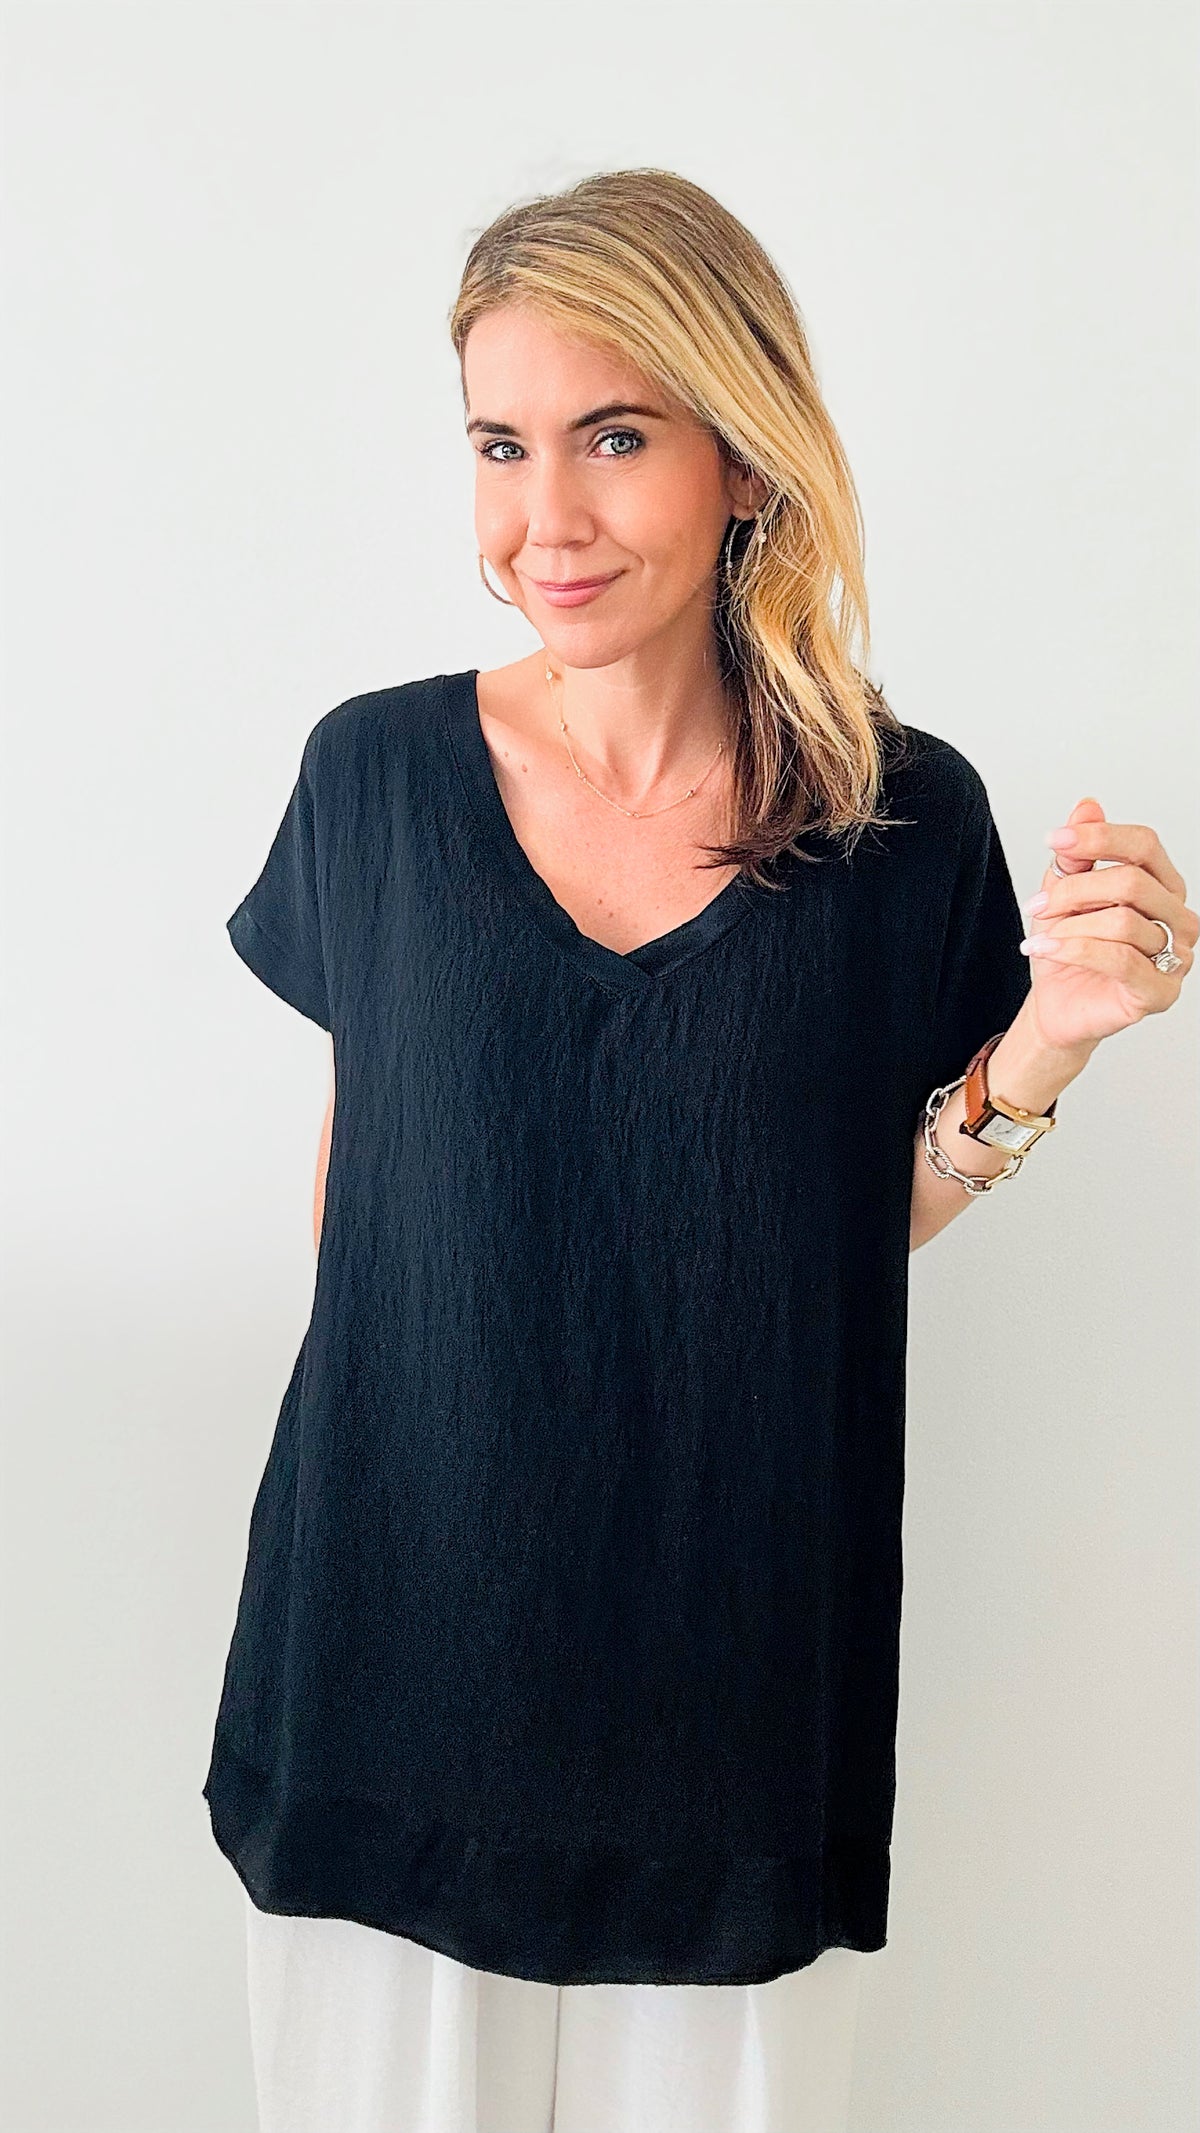 Satin Trim Italian Top - Black DAMAGED-110 Short Sleeve Tops-Italianissimo-Coastal Bloom Boutique, find the trendiest versions of the popular styles and looks Located in Indialantic, FL